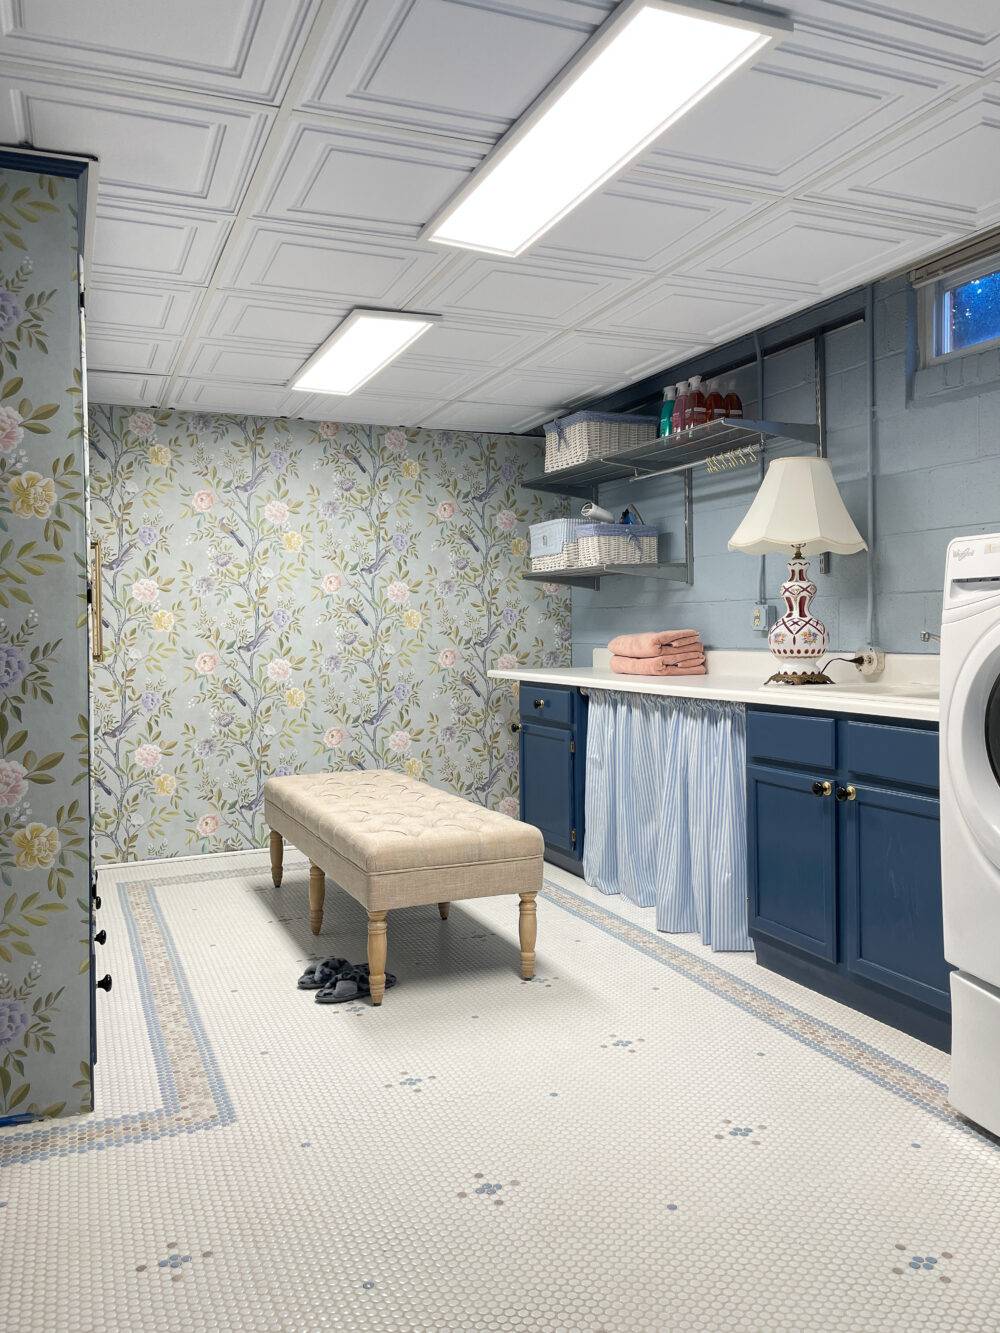 Blue laundry room with beige bench and floral wallpaper. Blue, taupe and white mosaic patterned floor.